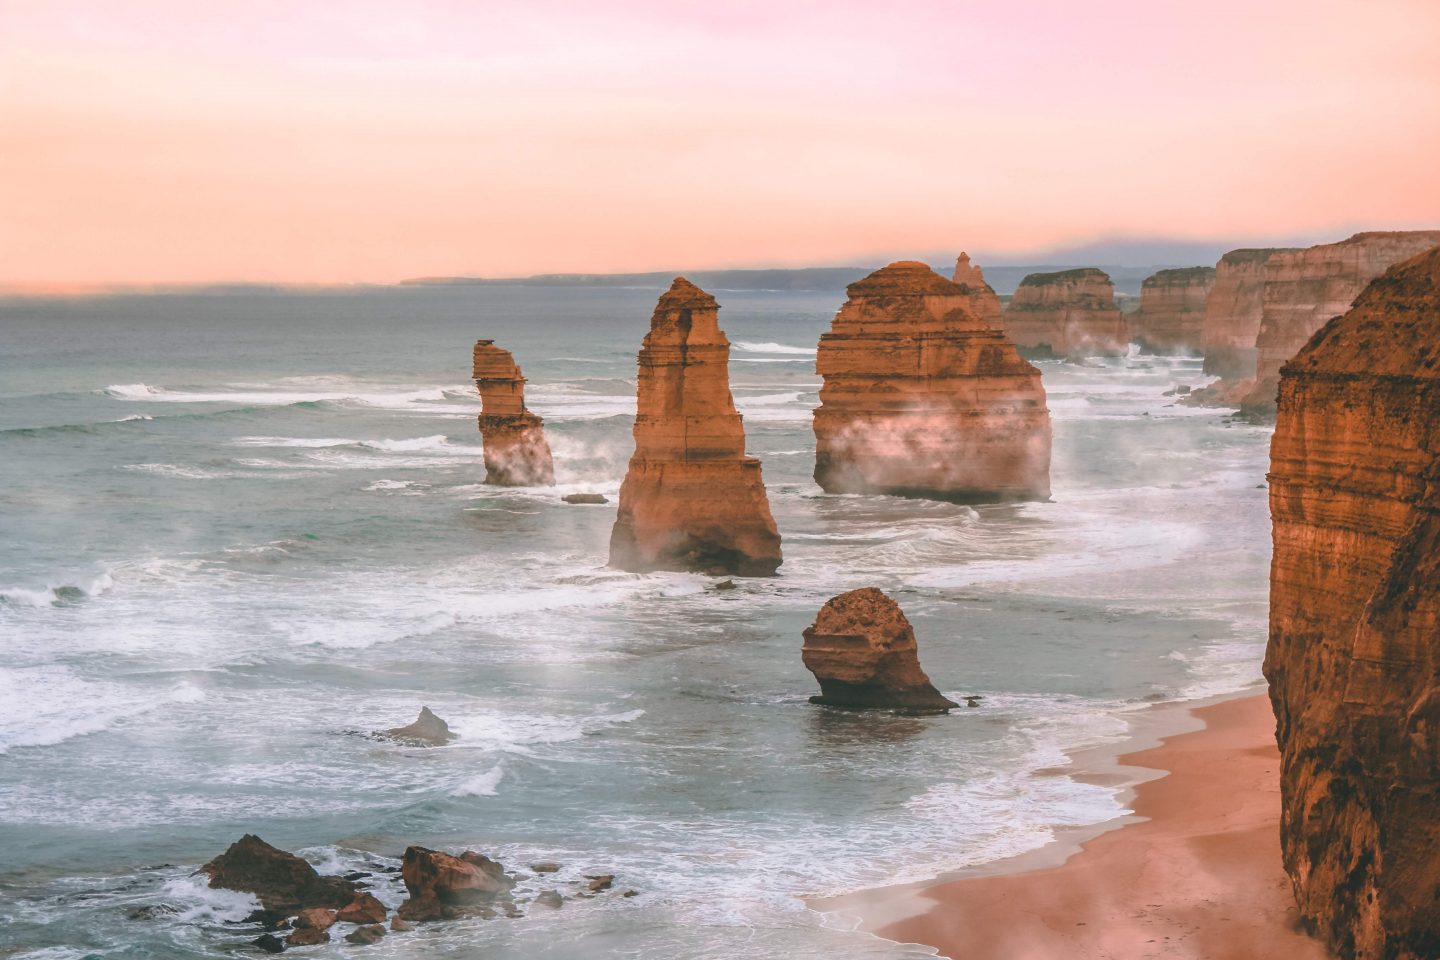 Take time to explore the dramatic coastline with view of the 12 Apostles